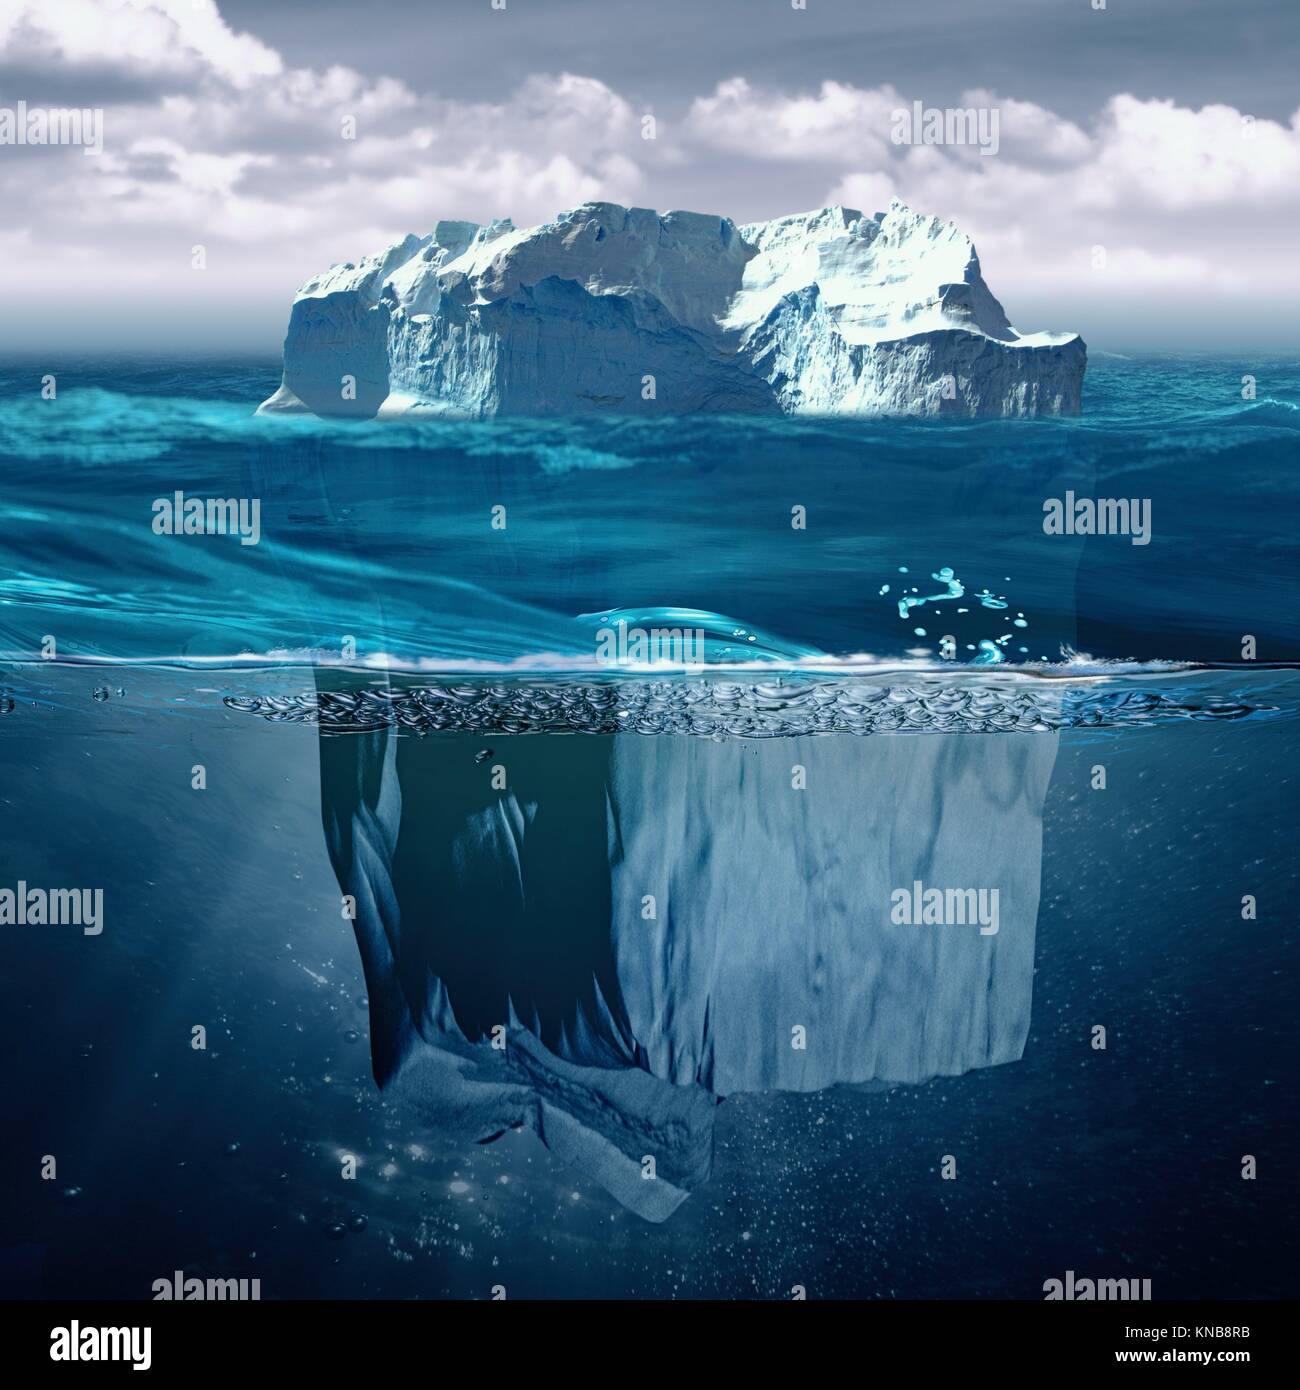 Iceberg, marine backgrounds with north ocean and underwater landscape. Stock Photo